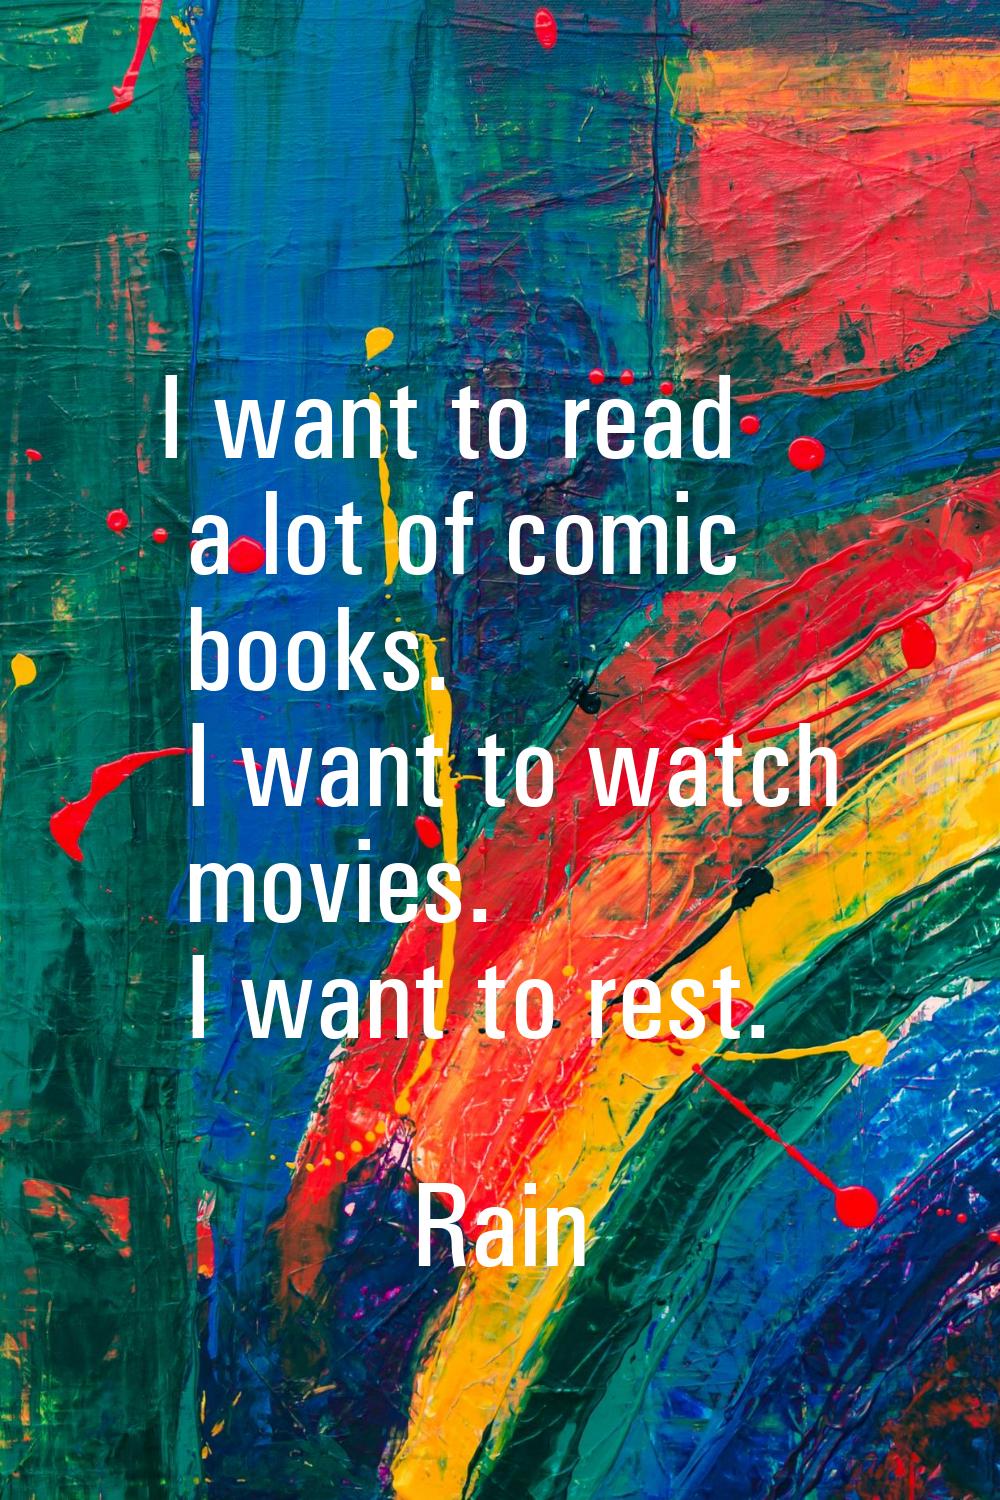 I want to read a lot of comic books. I want to watch movies. I want to rest.